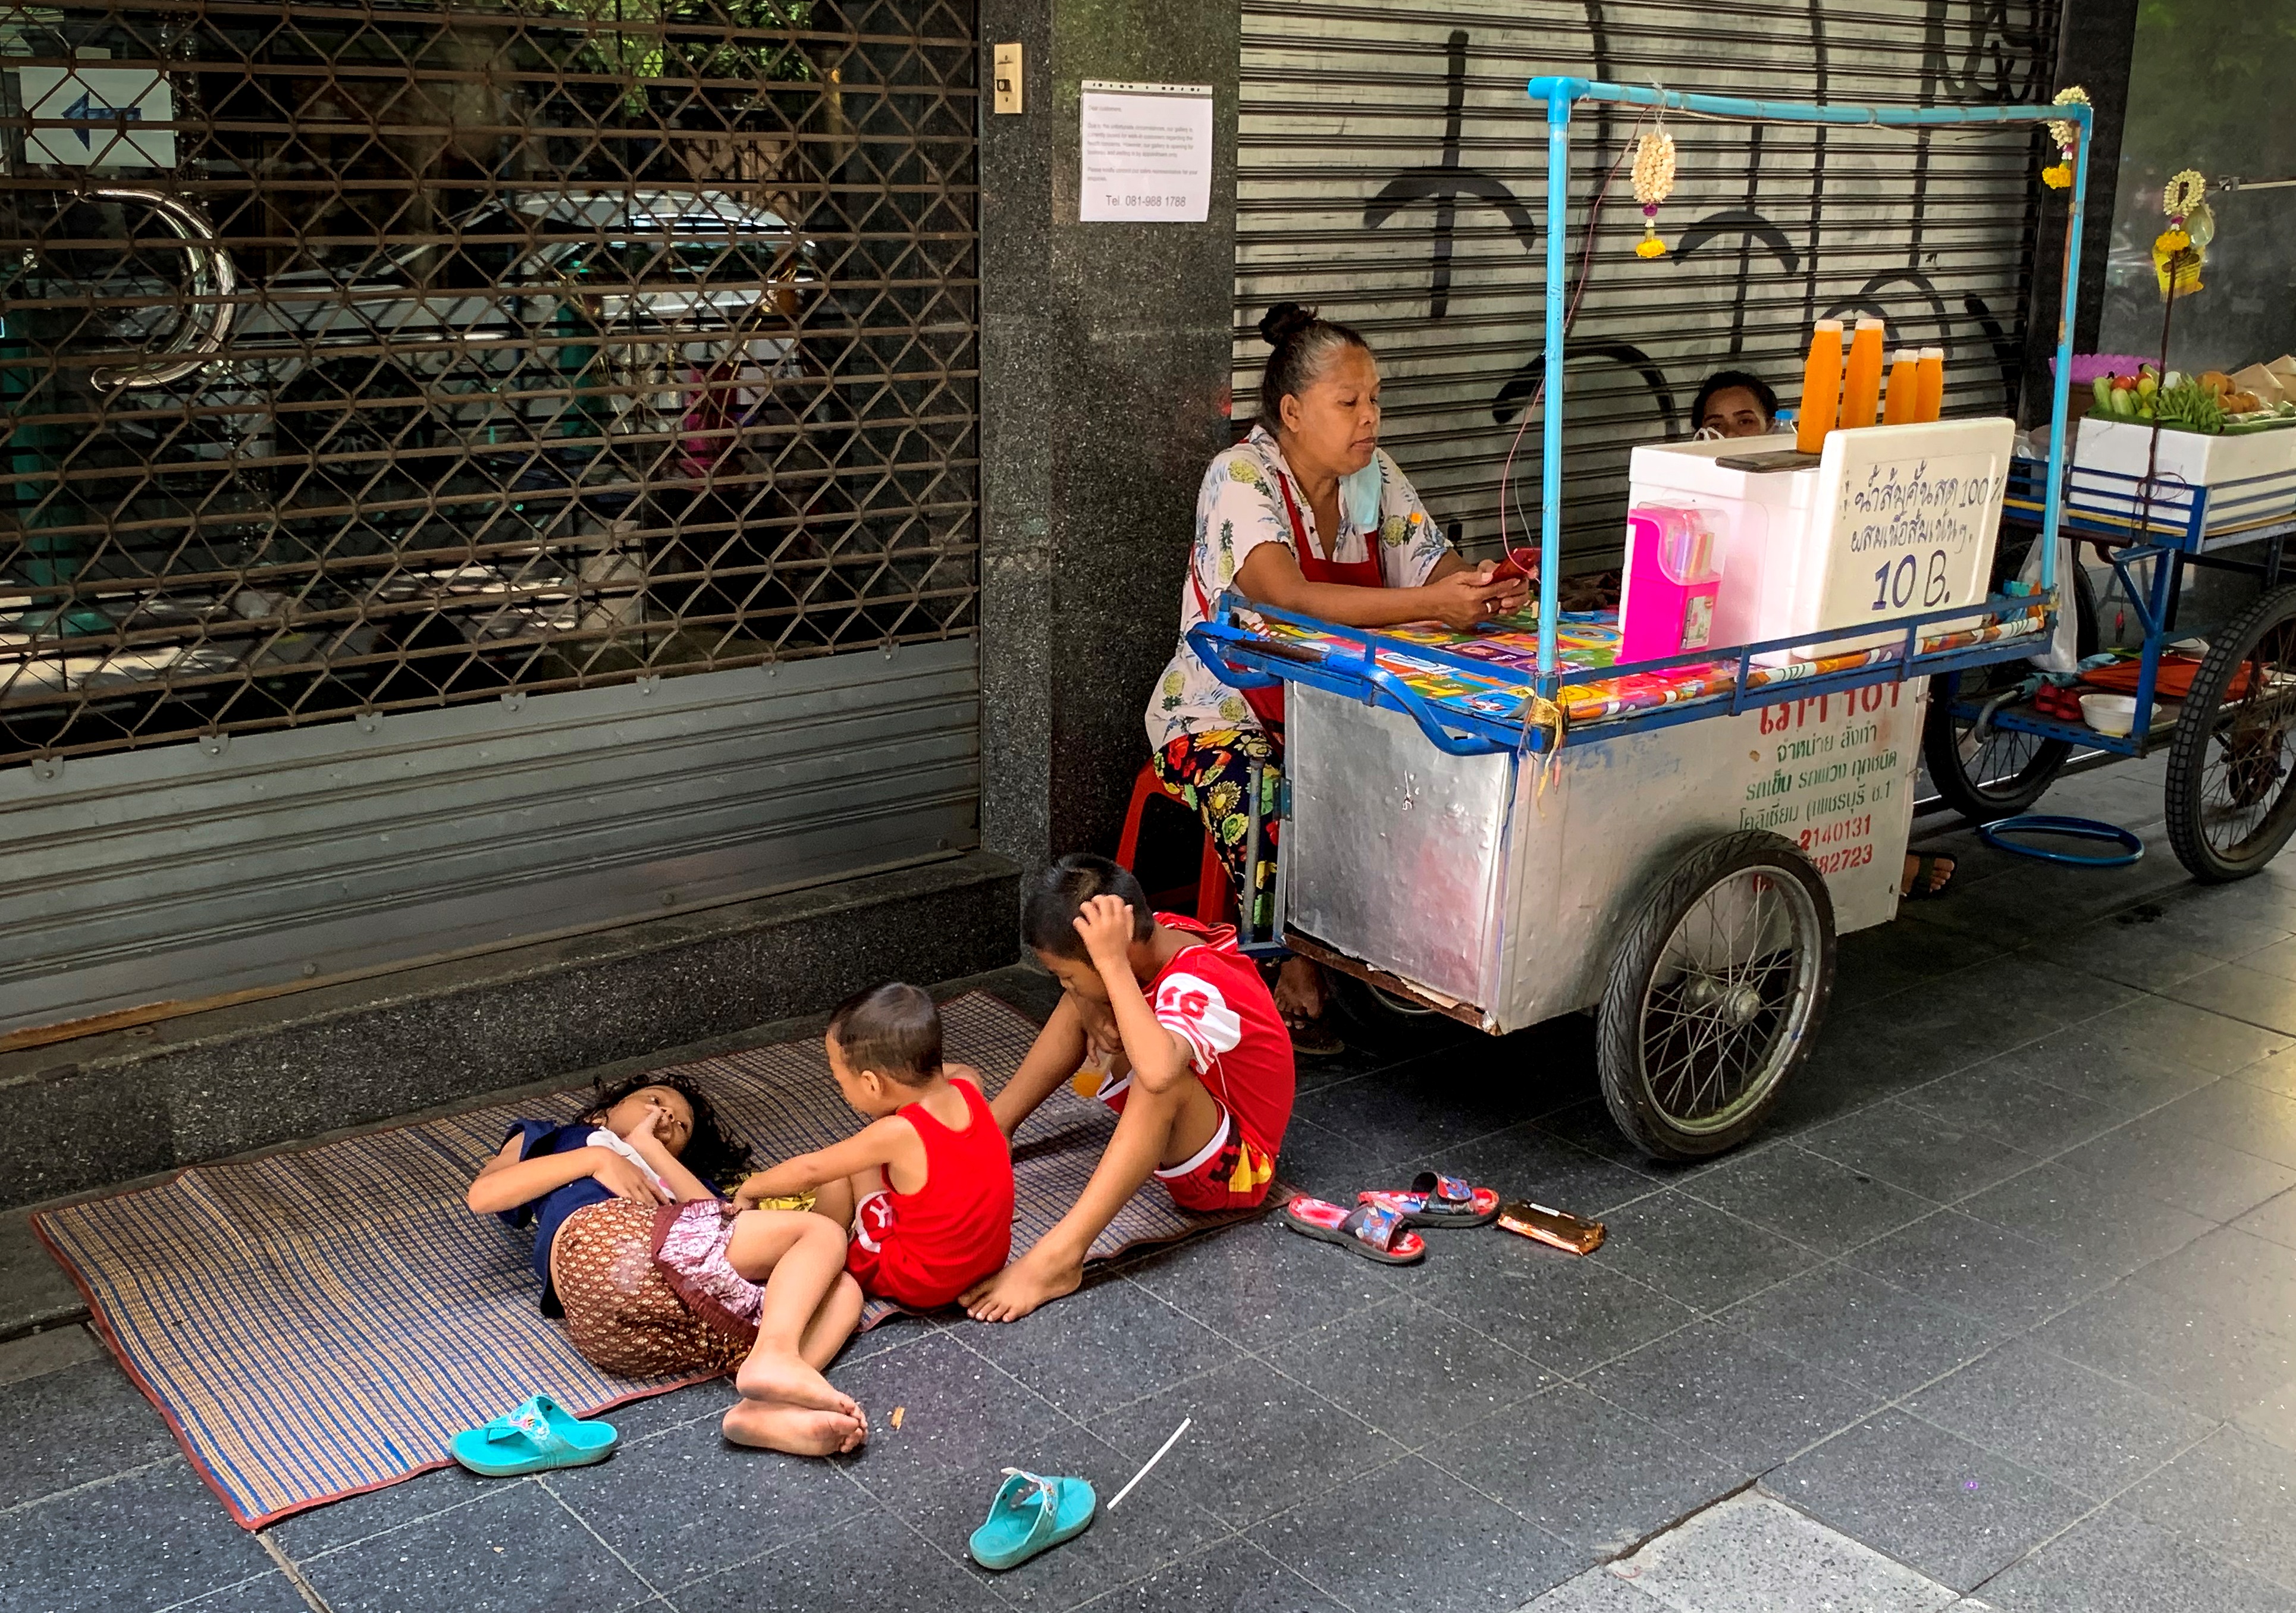 The children of a fruit juice vendor play next to her cart in Bangkok on June 25, 2020. (Photo by Mladen ANTONOV / AFP)